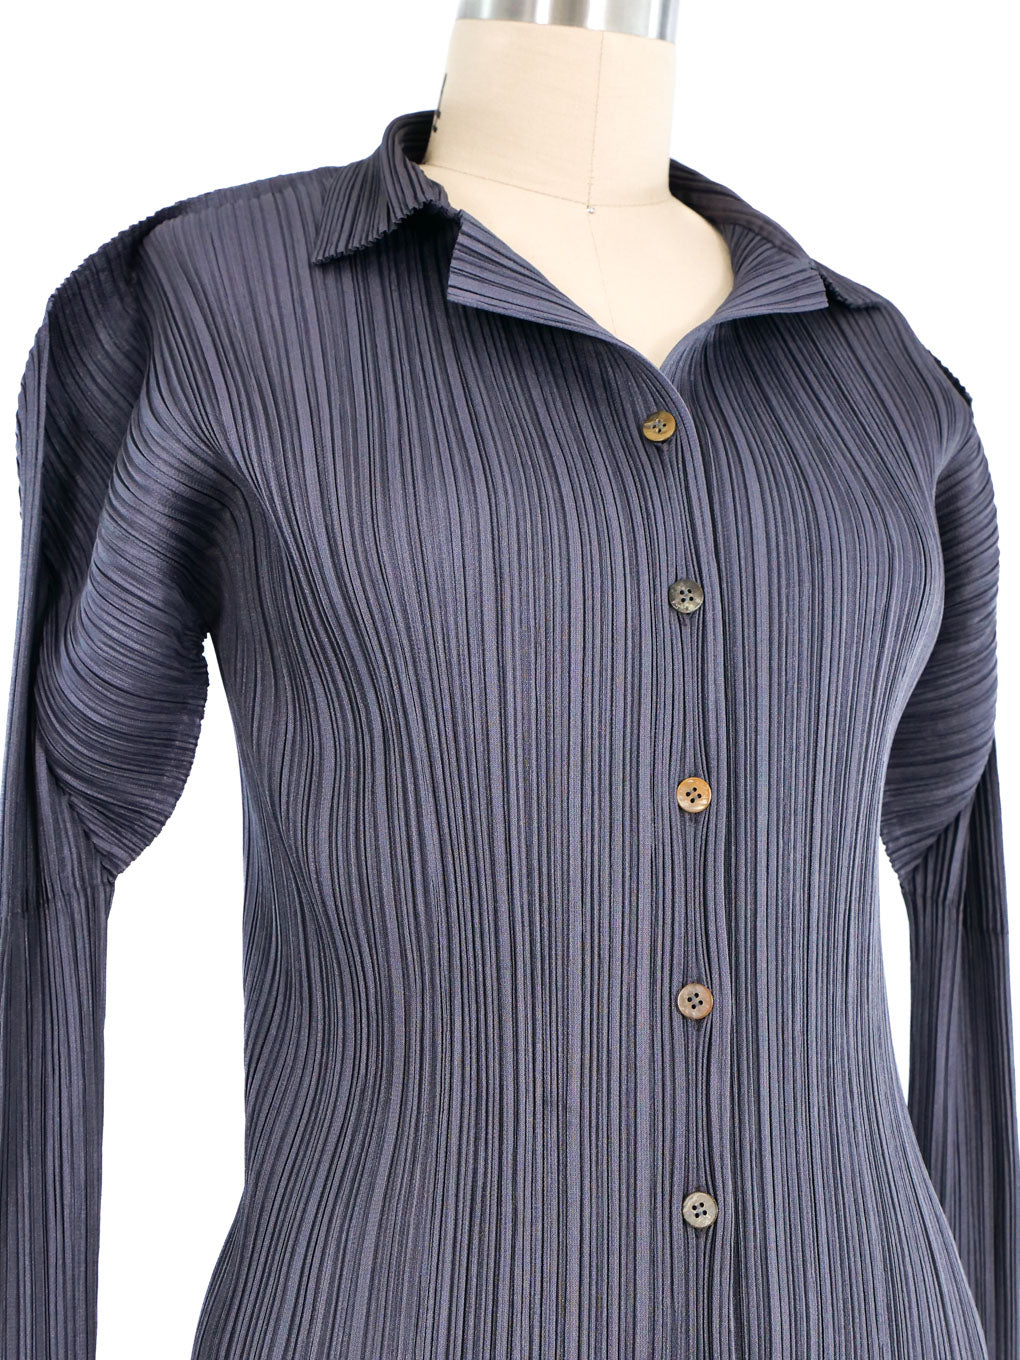 Issey Miyake Pleats Please Collared Button Down Shirt - Black